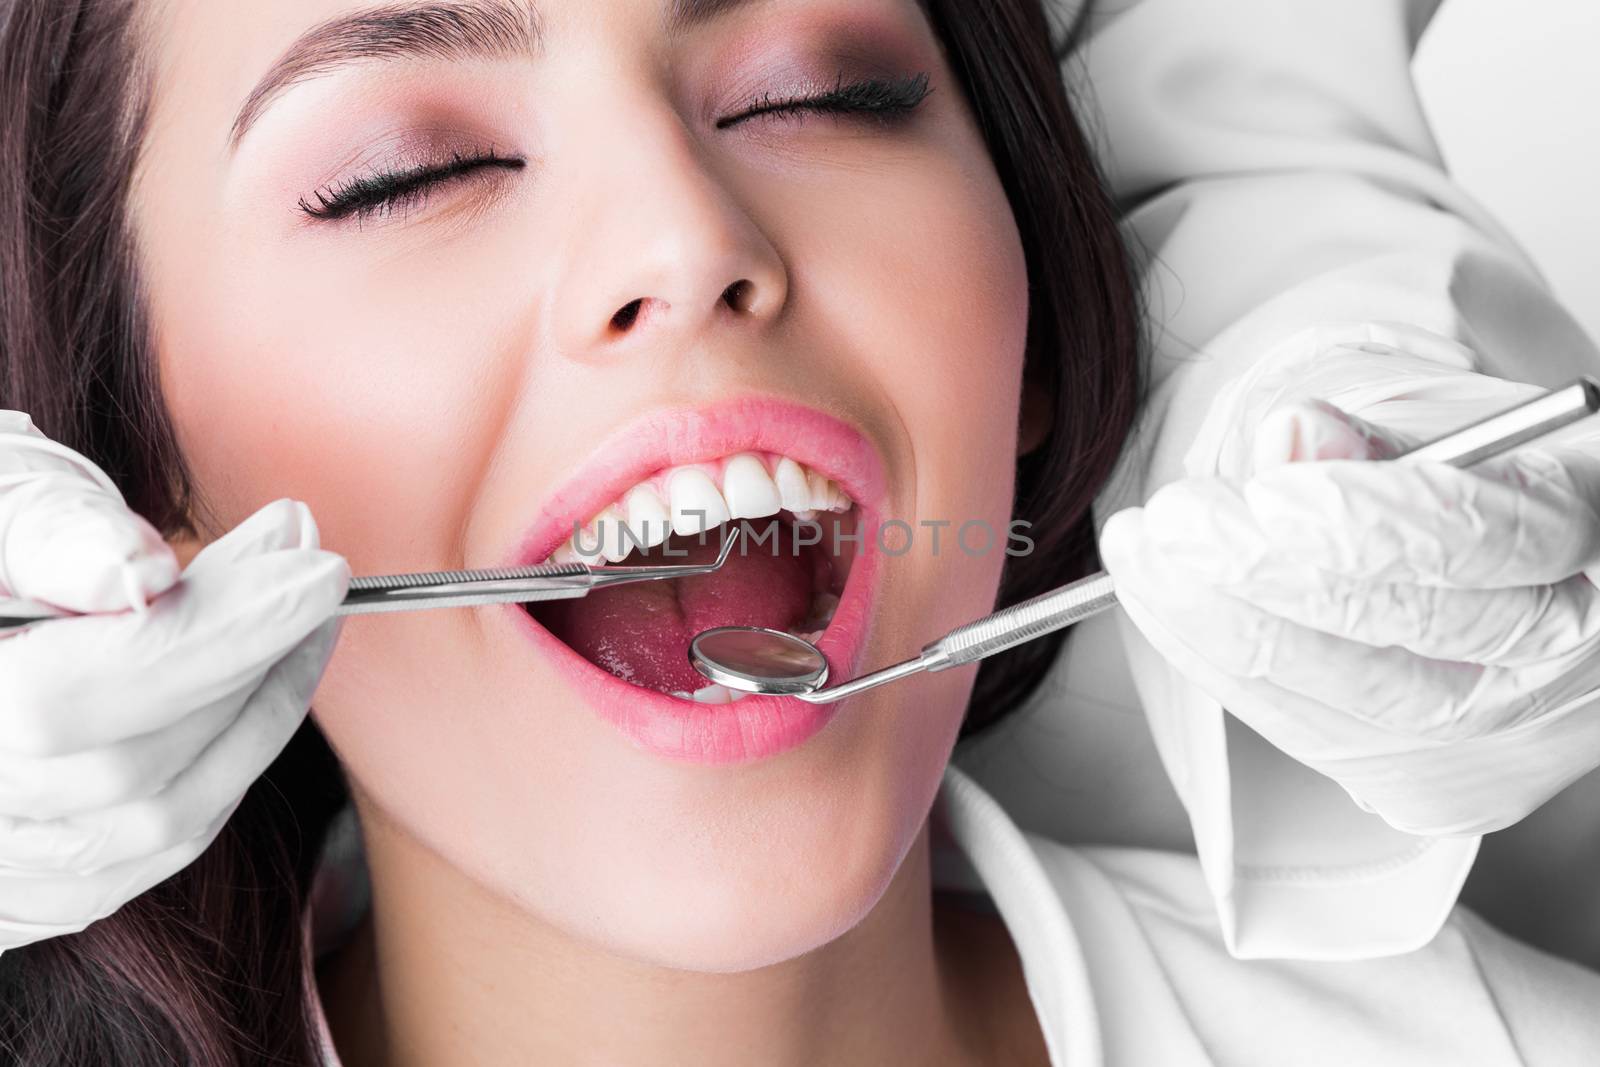 Dentist examines the teeth of beautiful female patient